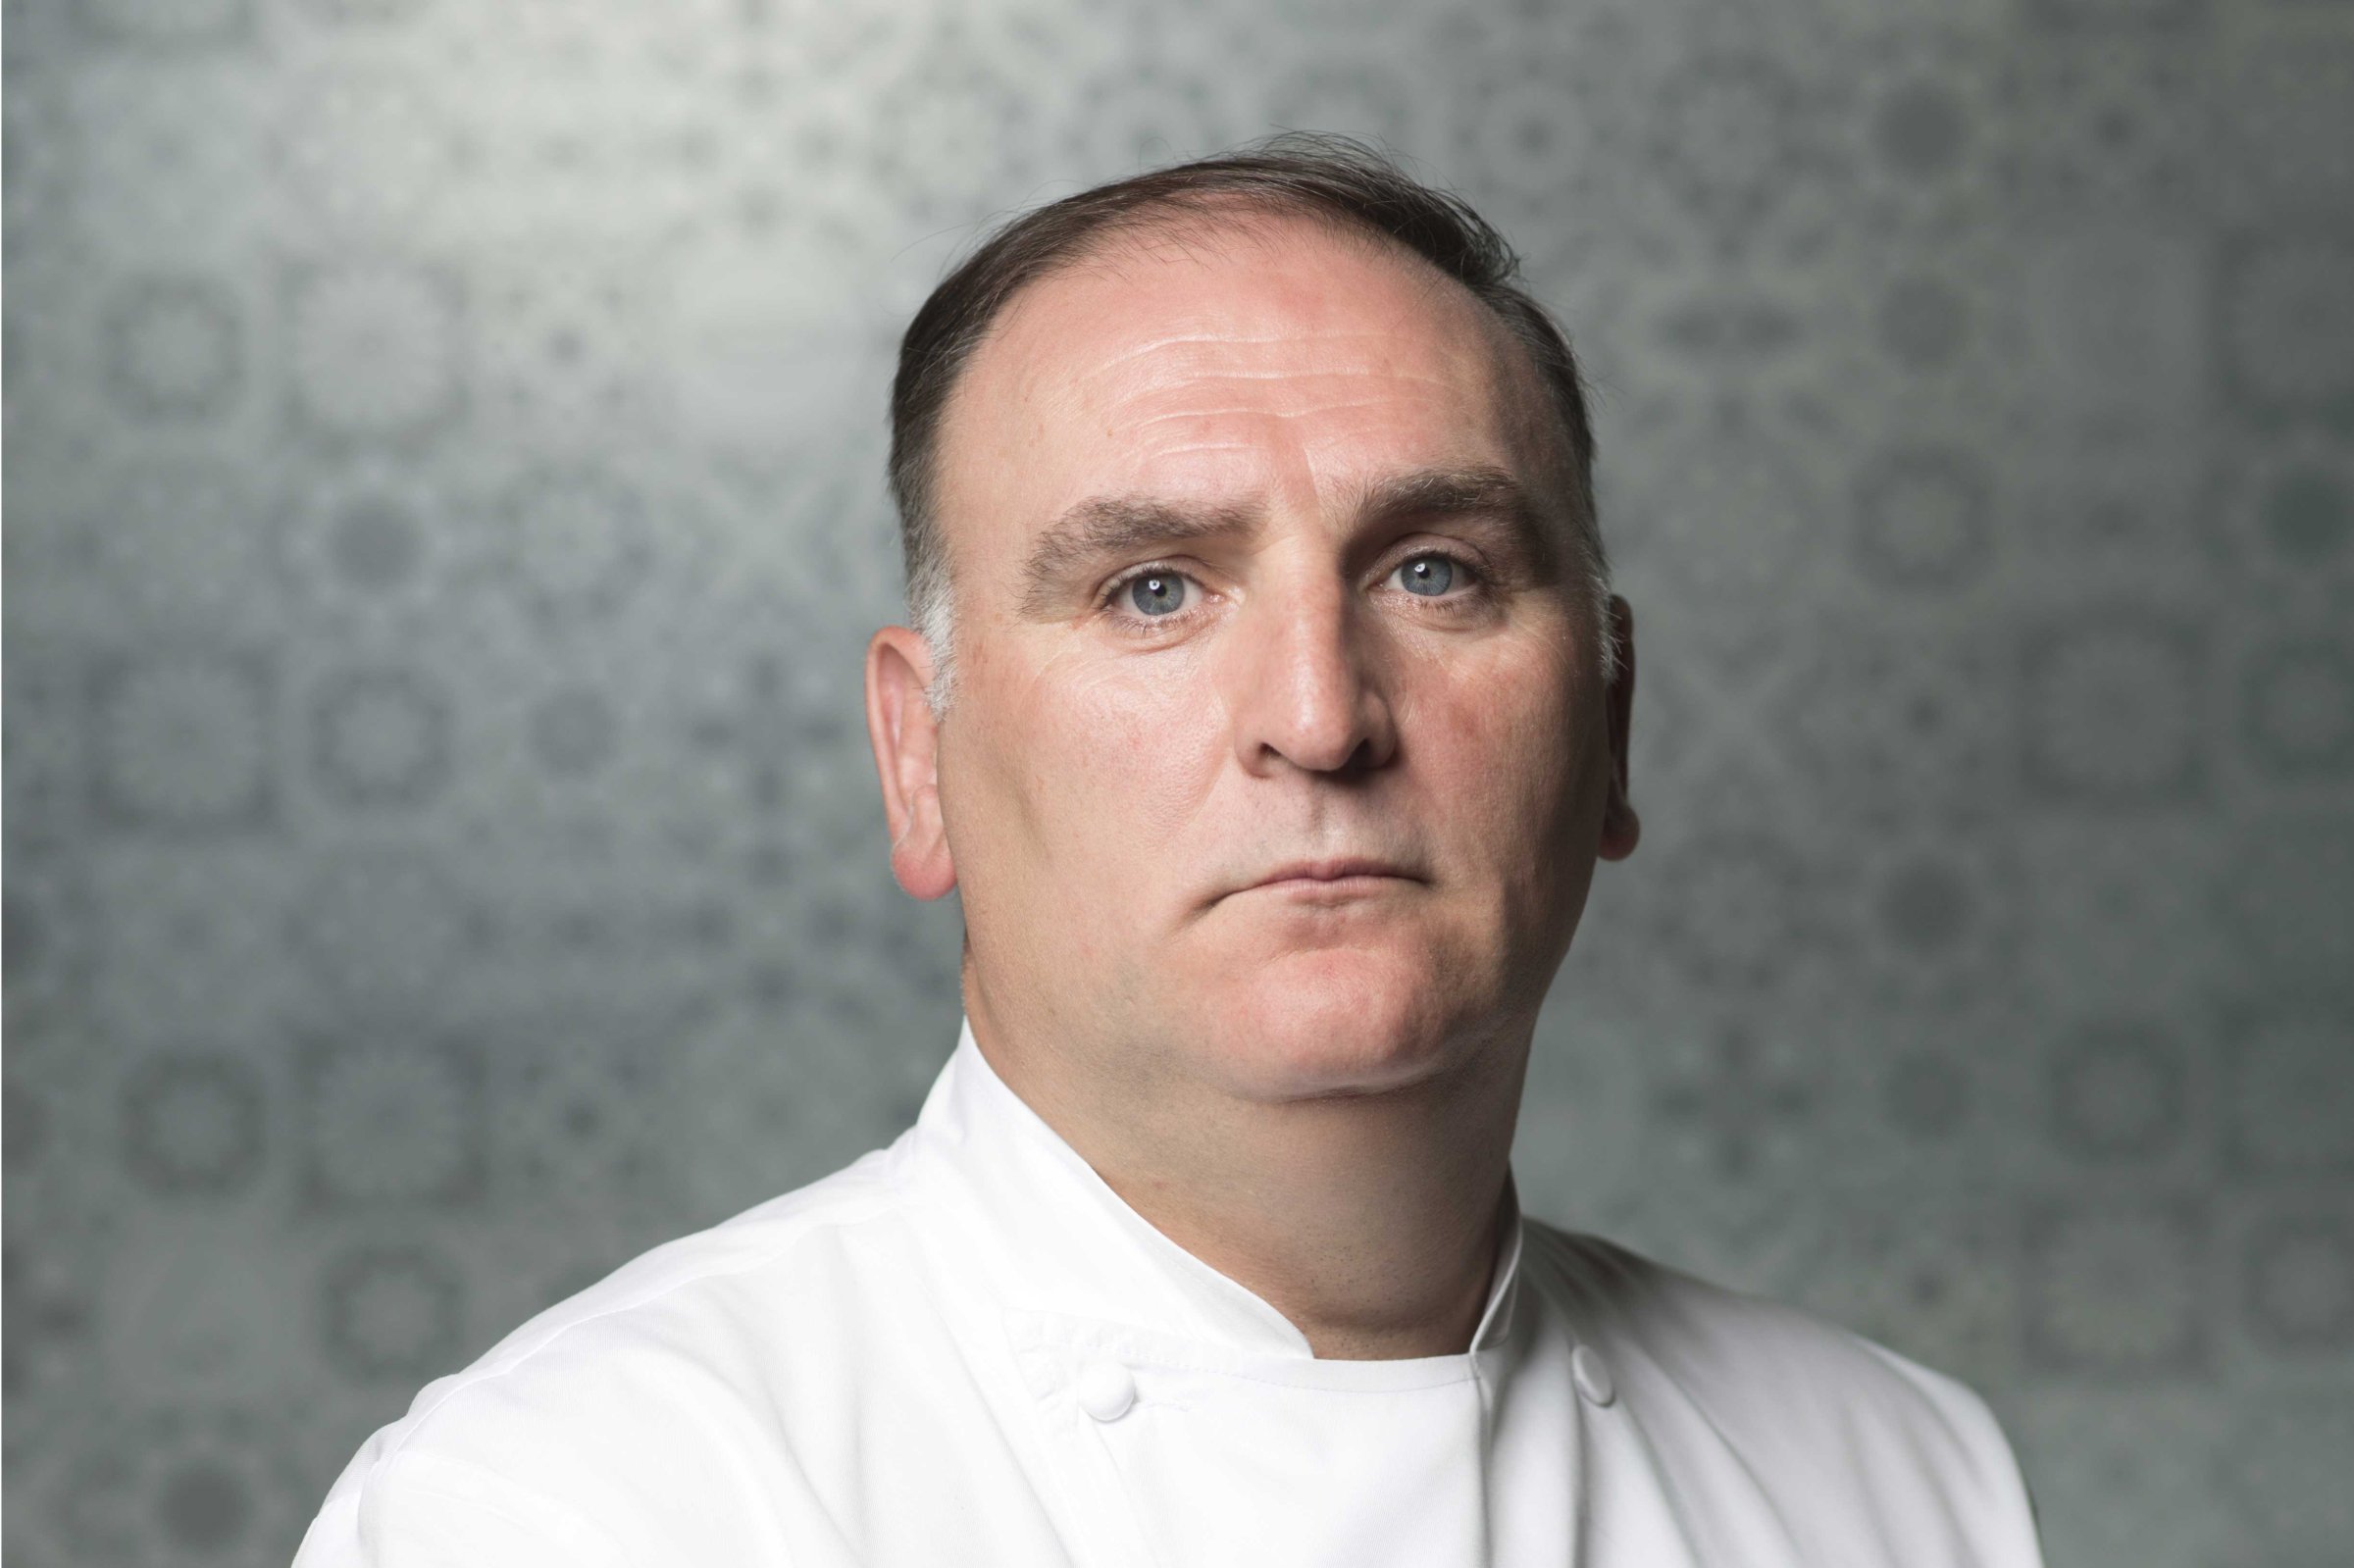 Celebrity Chef and Restaurateur Jose Andres photographed at Minibar in Washington, D.C. on May 01, 2014.